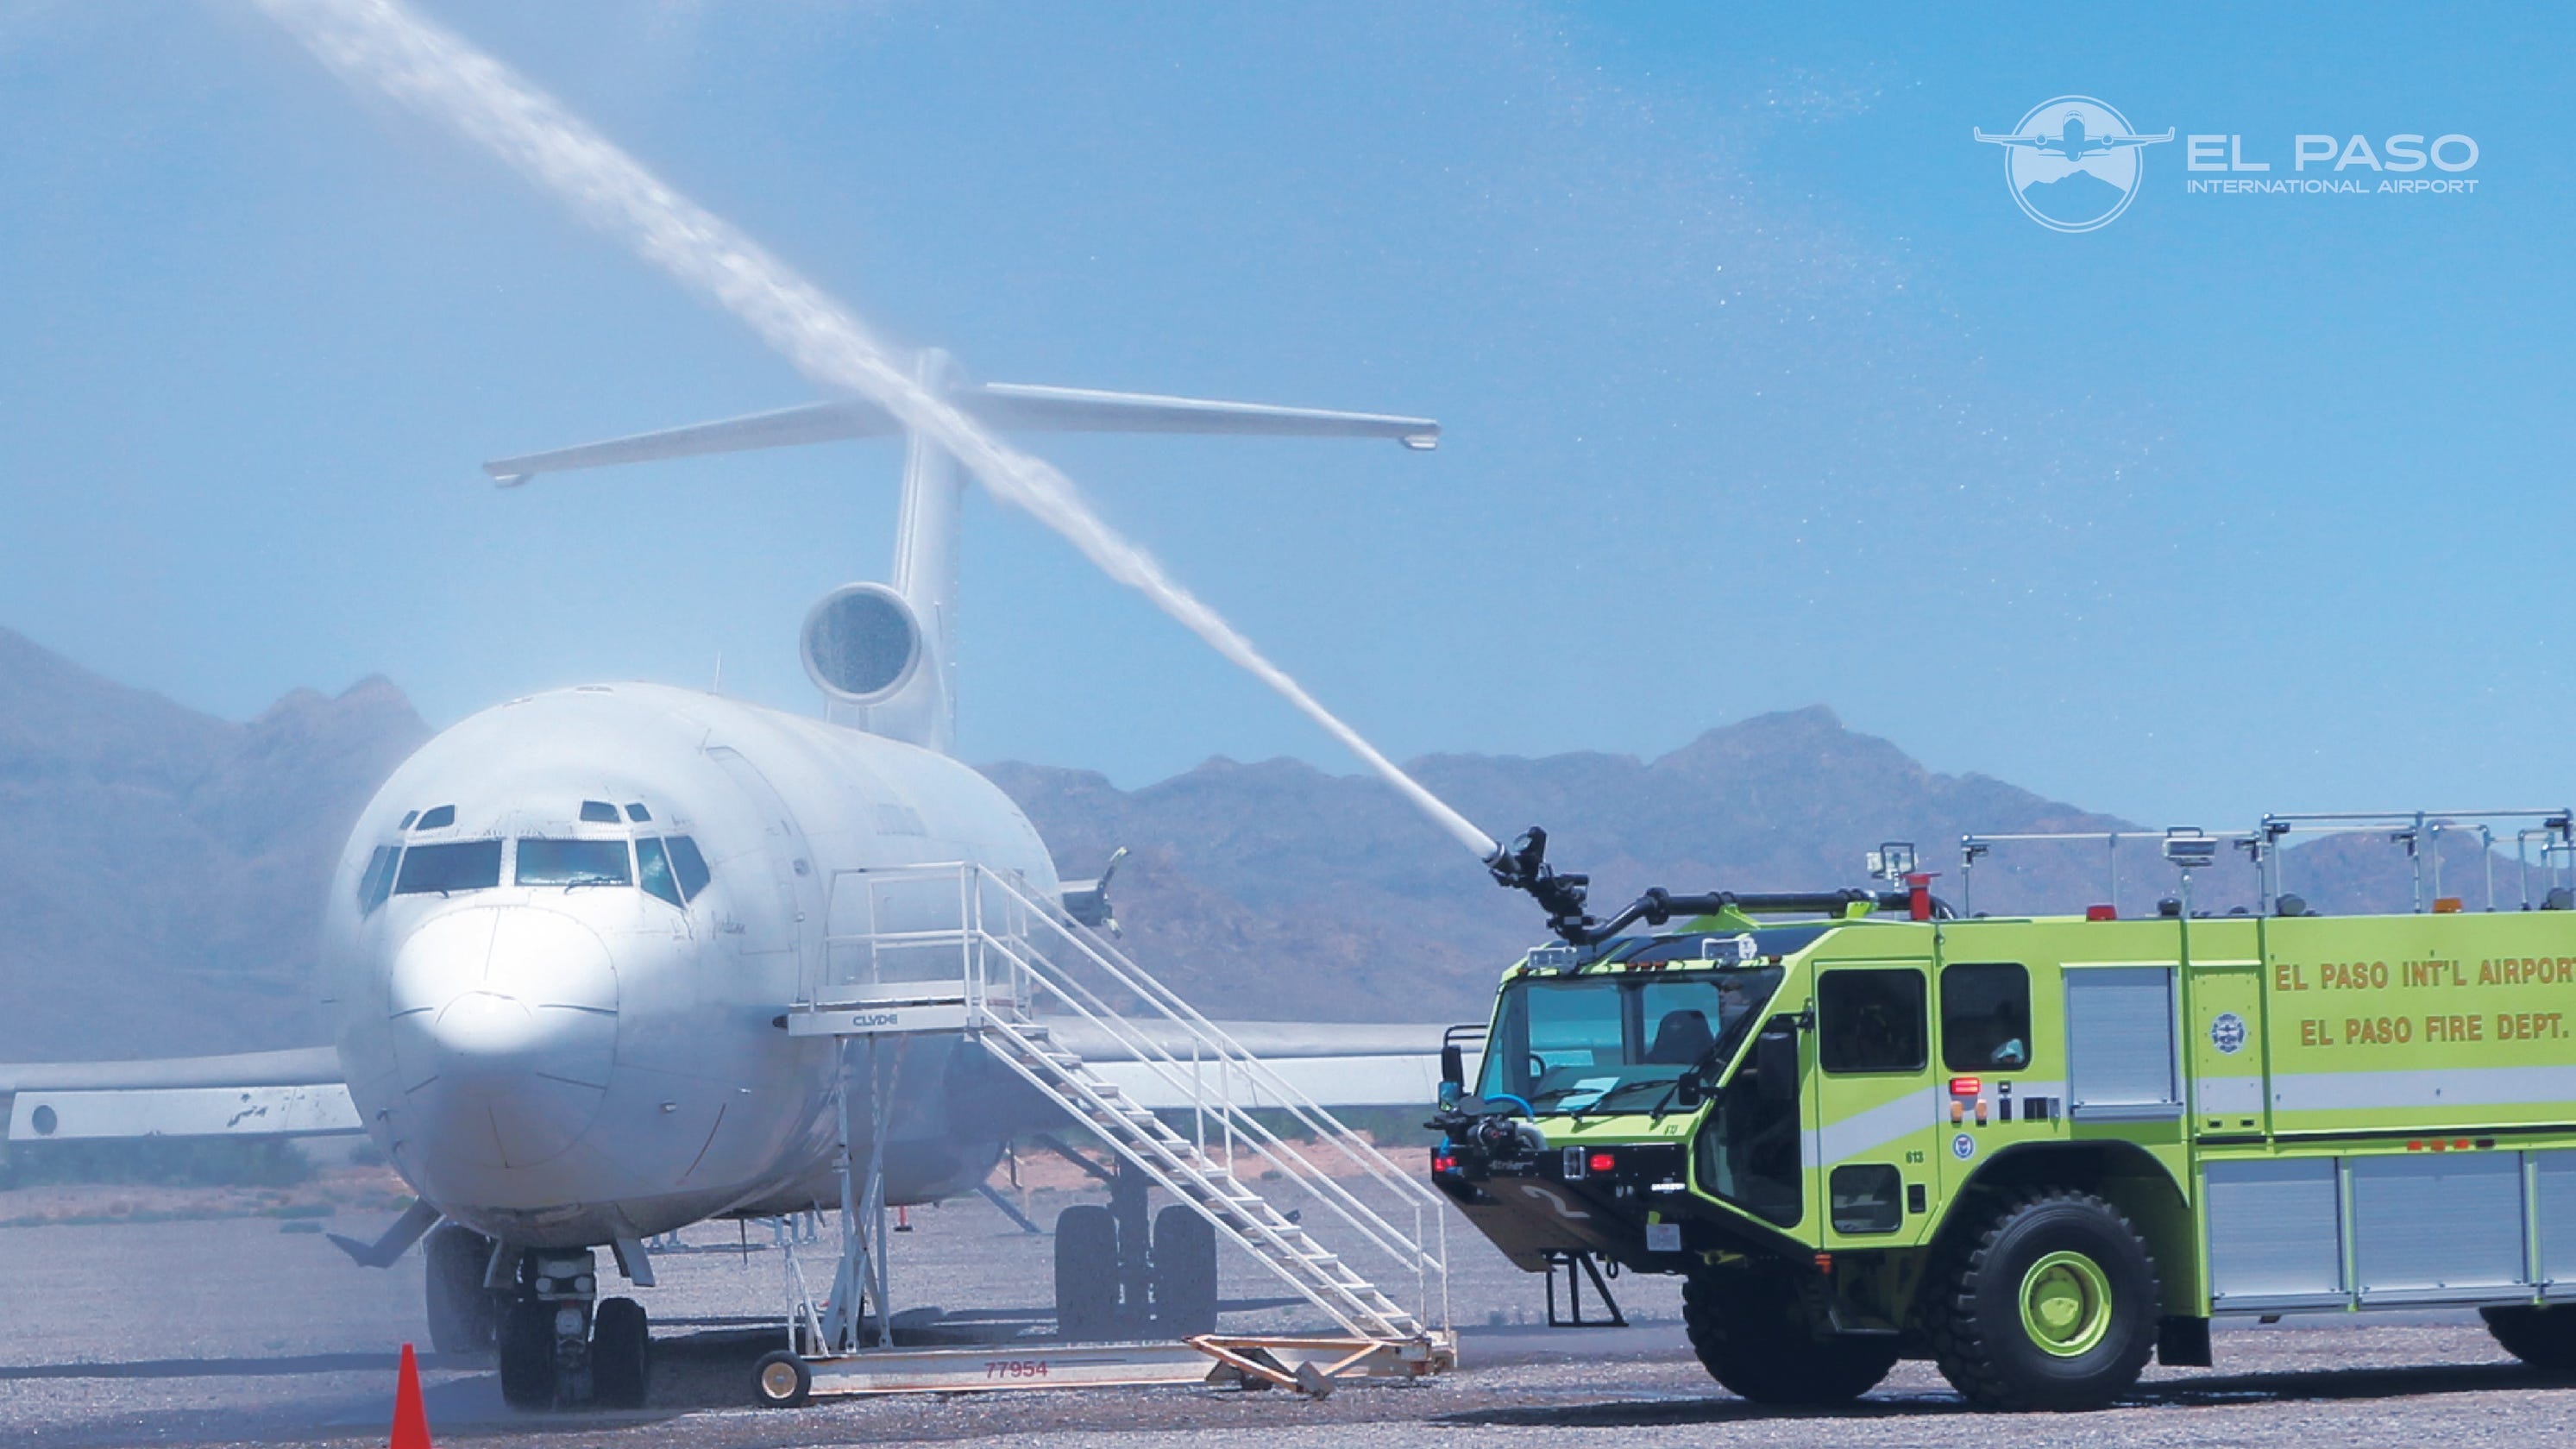 Live training exercise set for El Paso International Airport